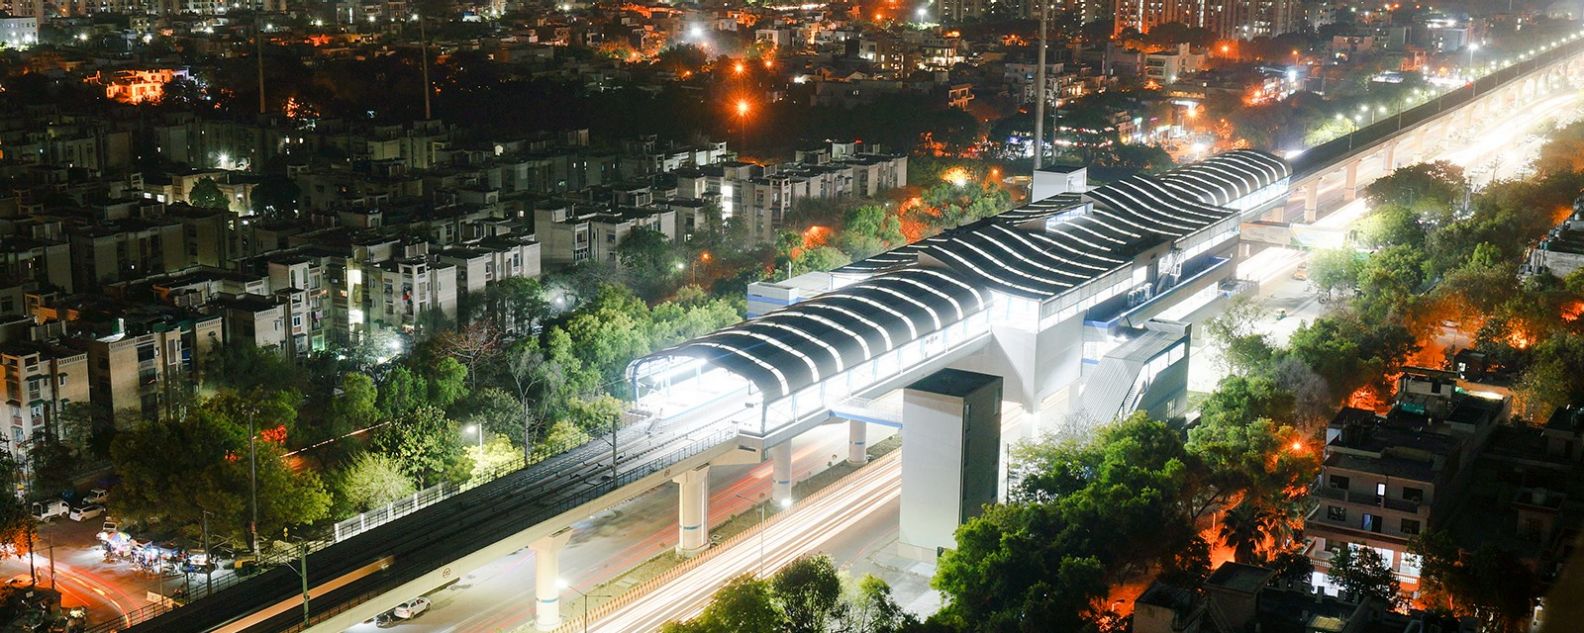 Lights of Delhi metro station with cityscape and traffic light trails in background